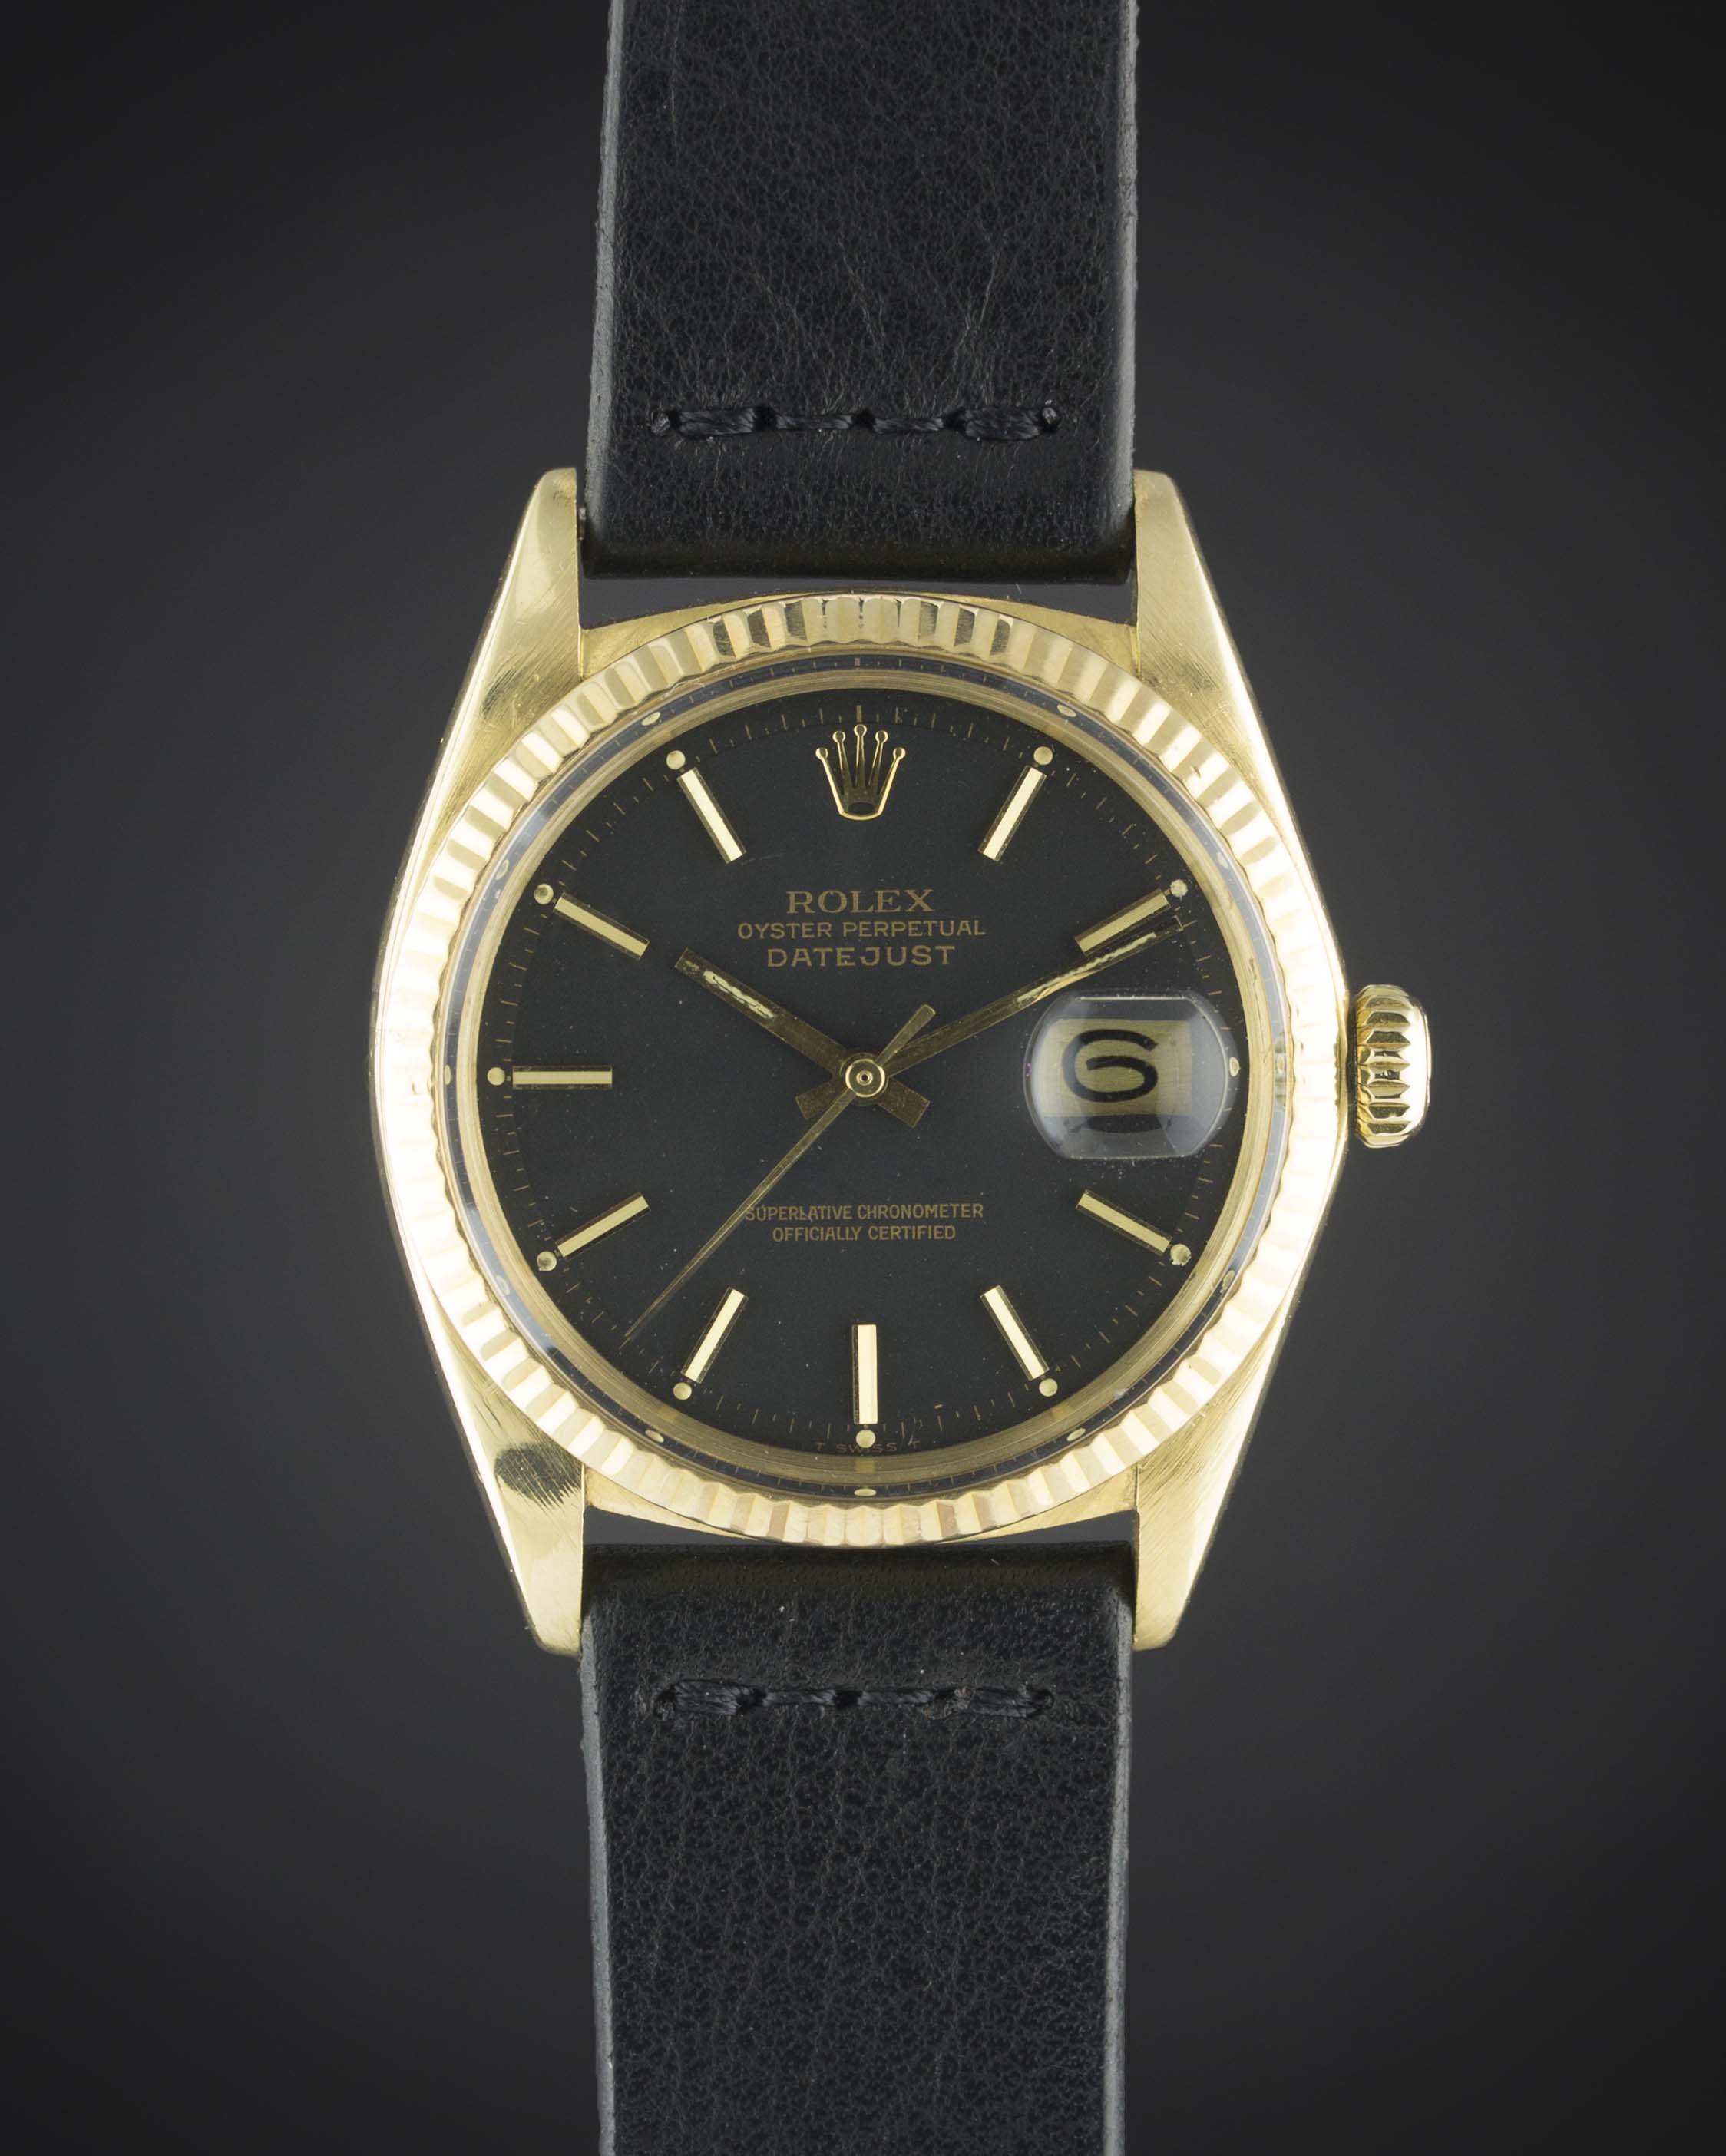 A RARE GENTLEMAN'S 18K SOLID GOLD ROLEX OYSTER PERPETUAL DATEJUST WRIST WATCH CIRCA 1965, REF. - Image 2 of 2